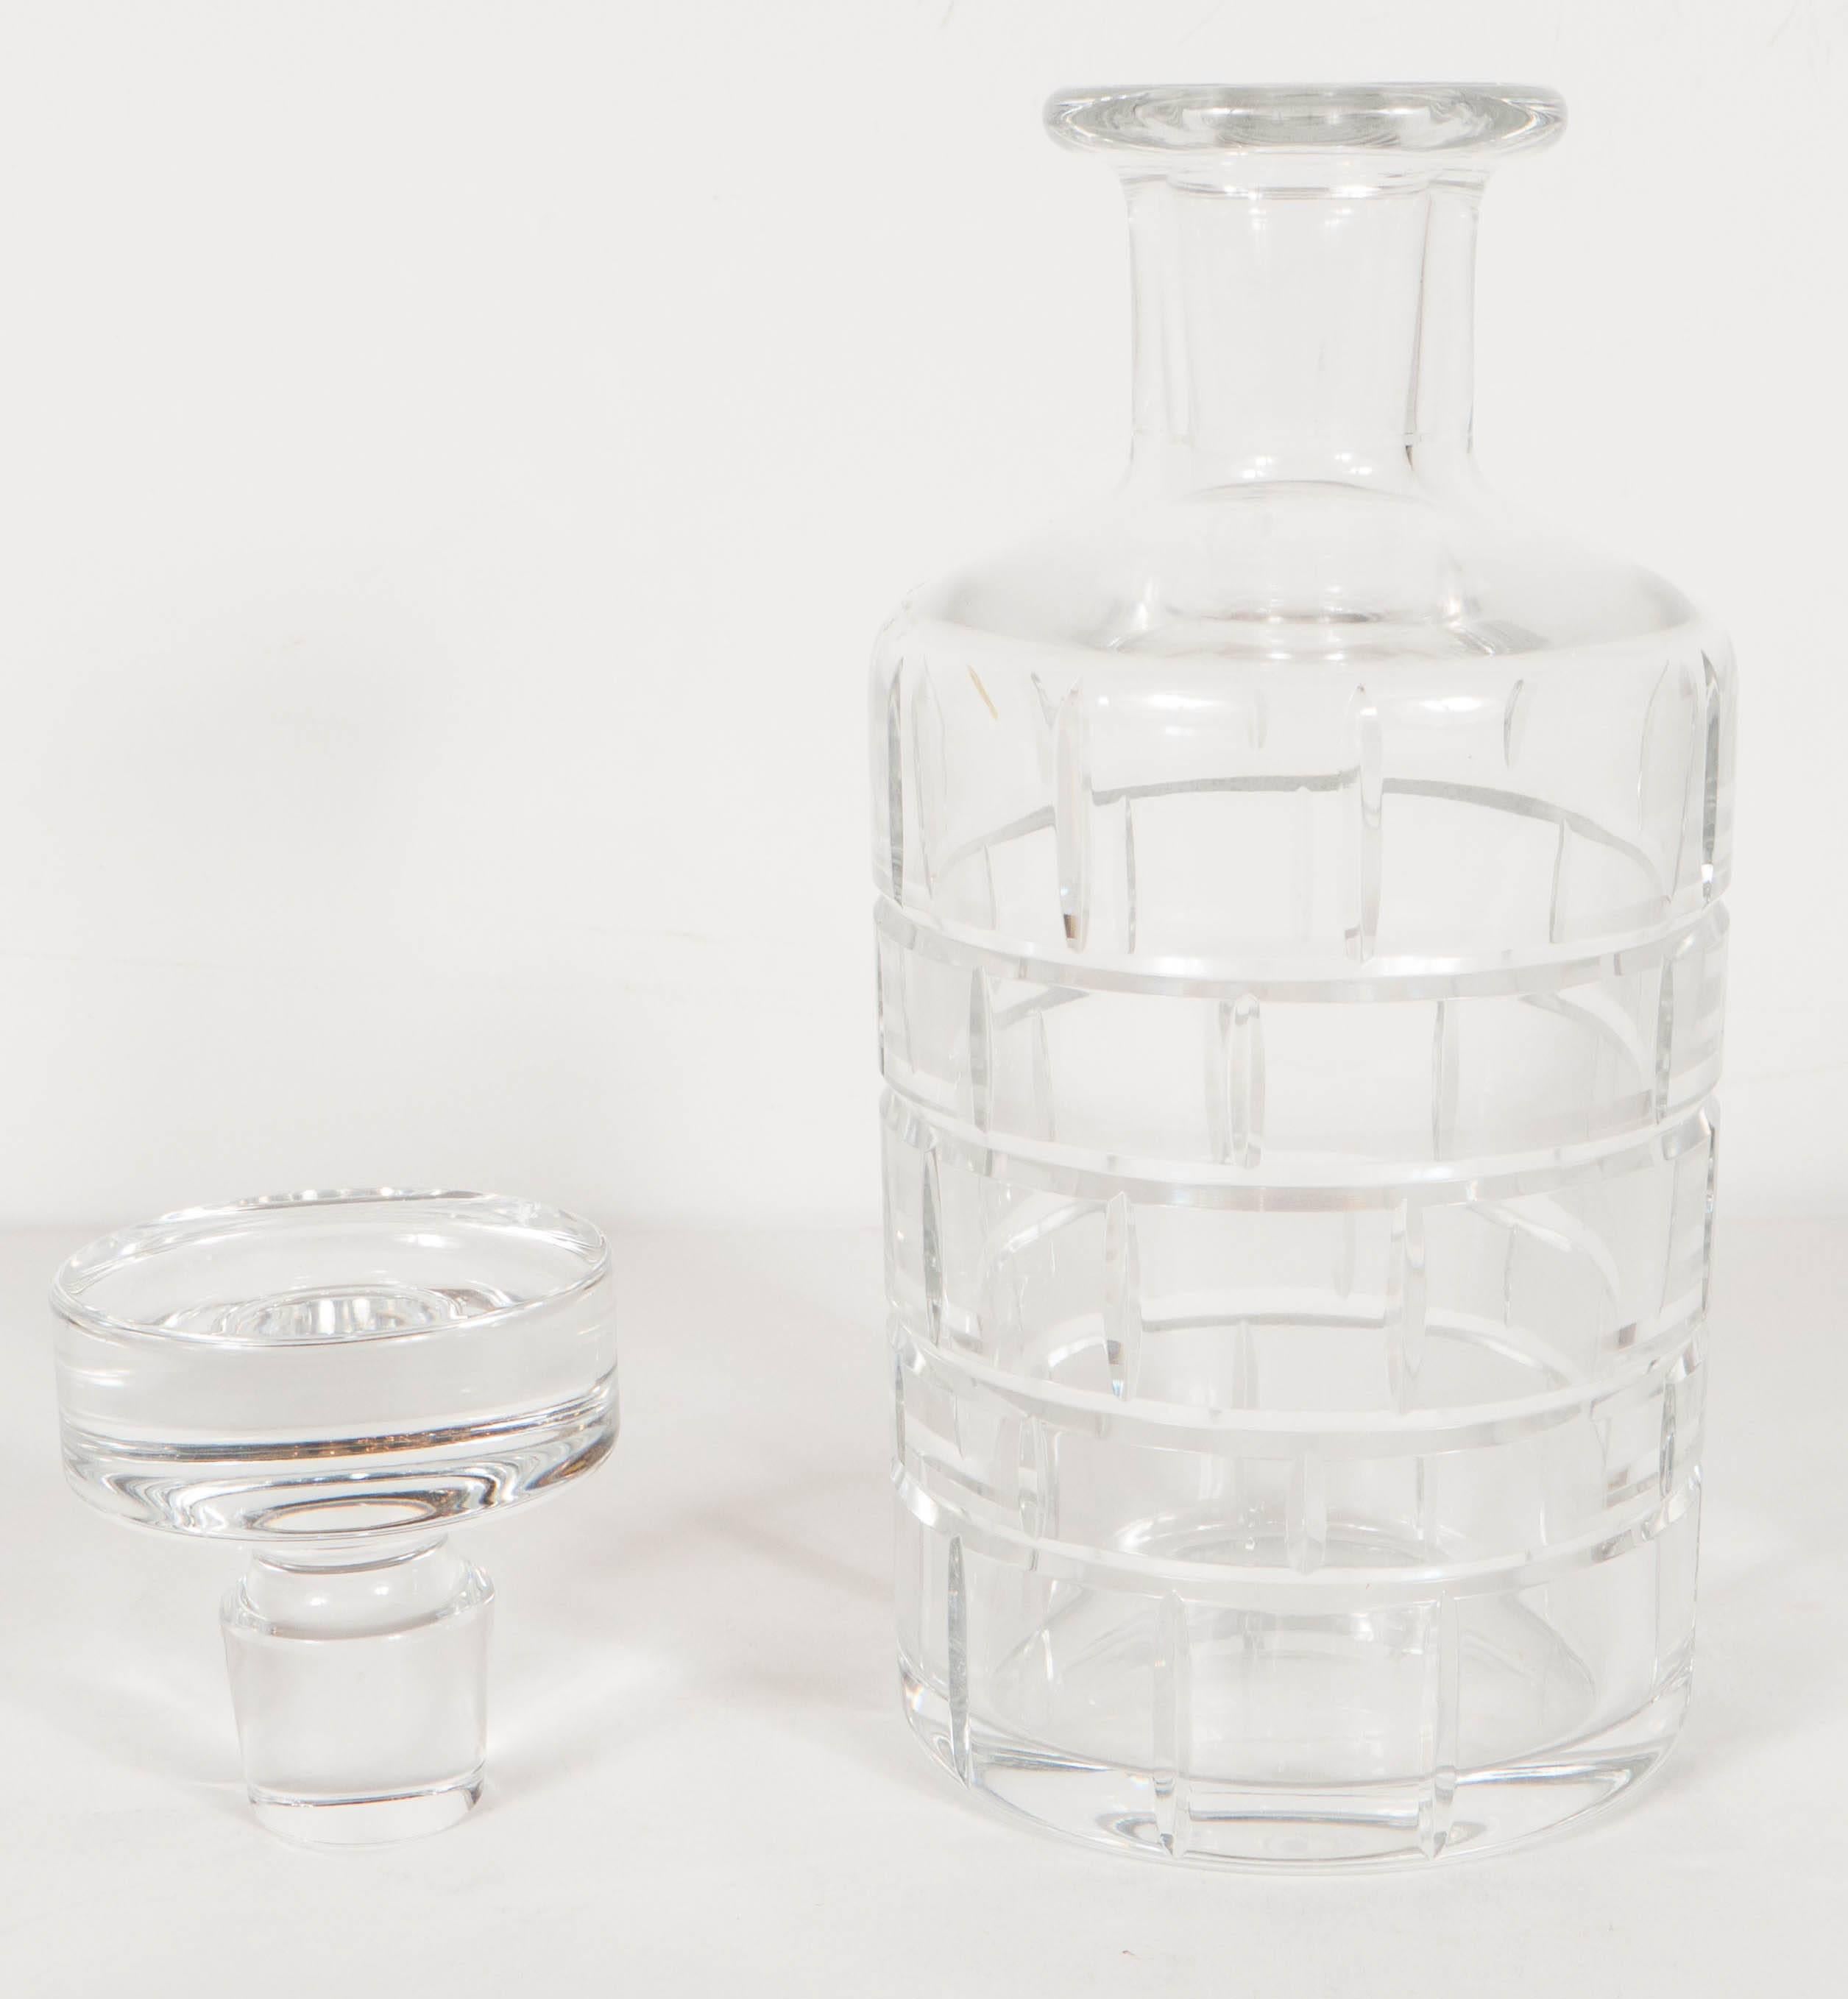 French Ultra Luxe Decanter with Cross-Hatch Detailing by Baccarat